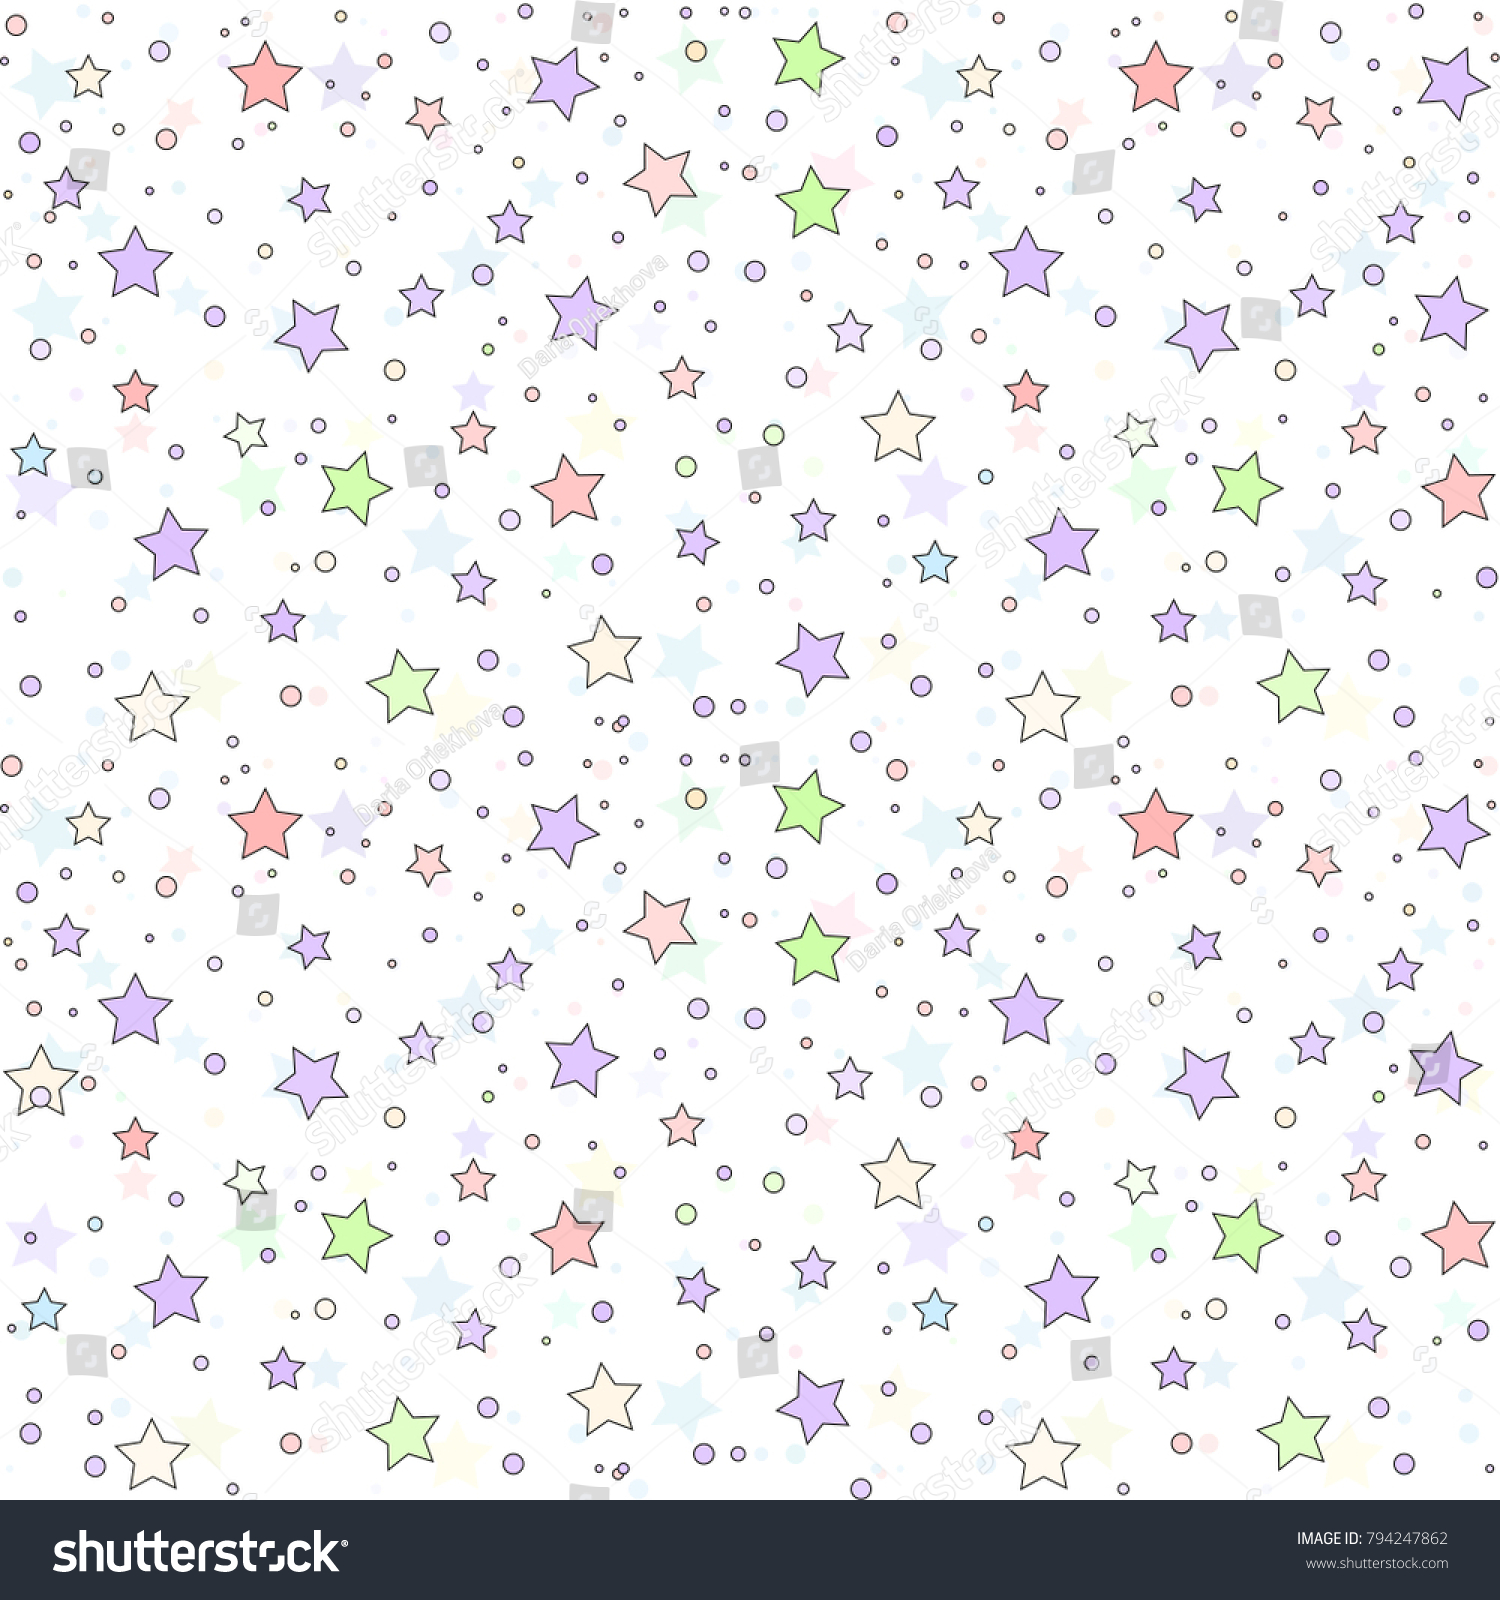 Festive bright background for your amazing - Royalty Free Stock Vector ...